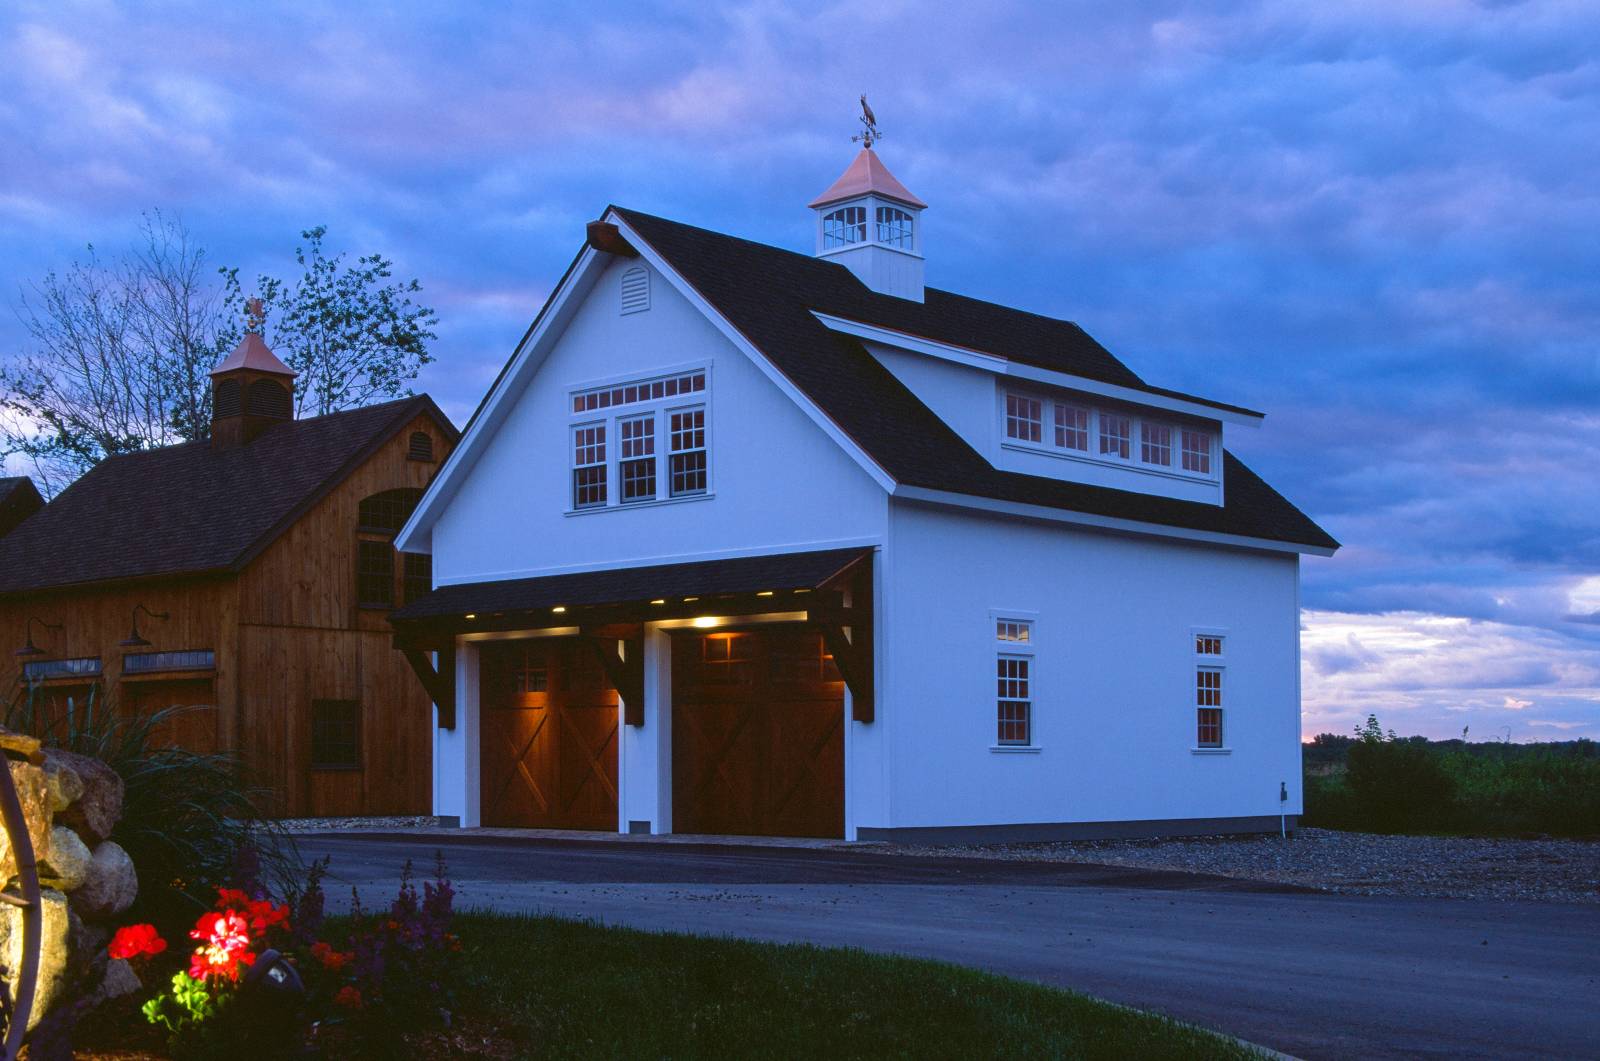 Carriage Barn in the Evening